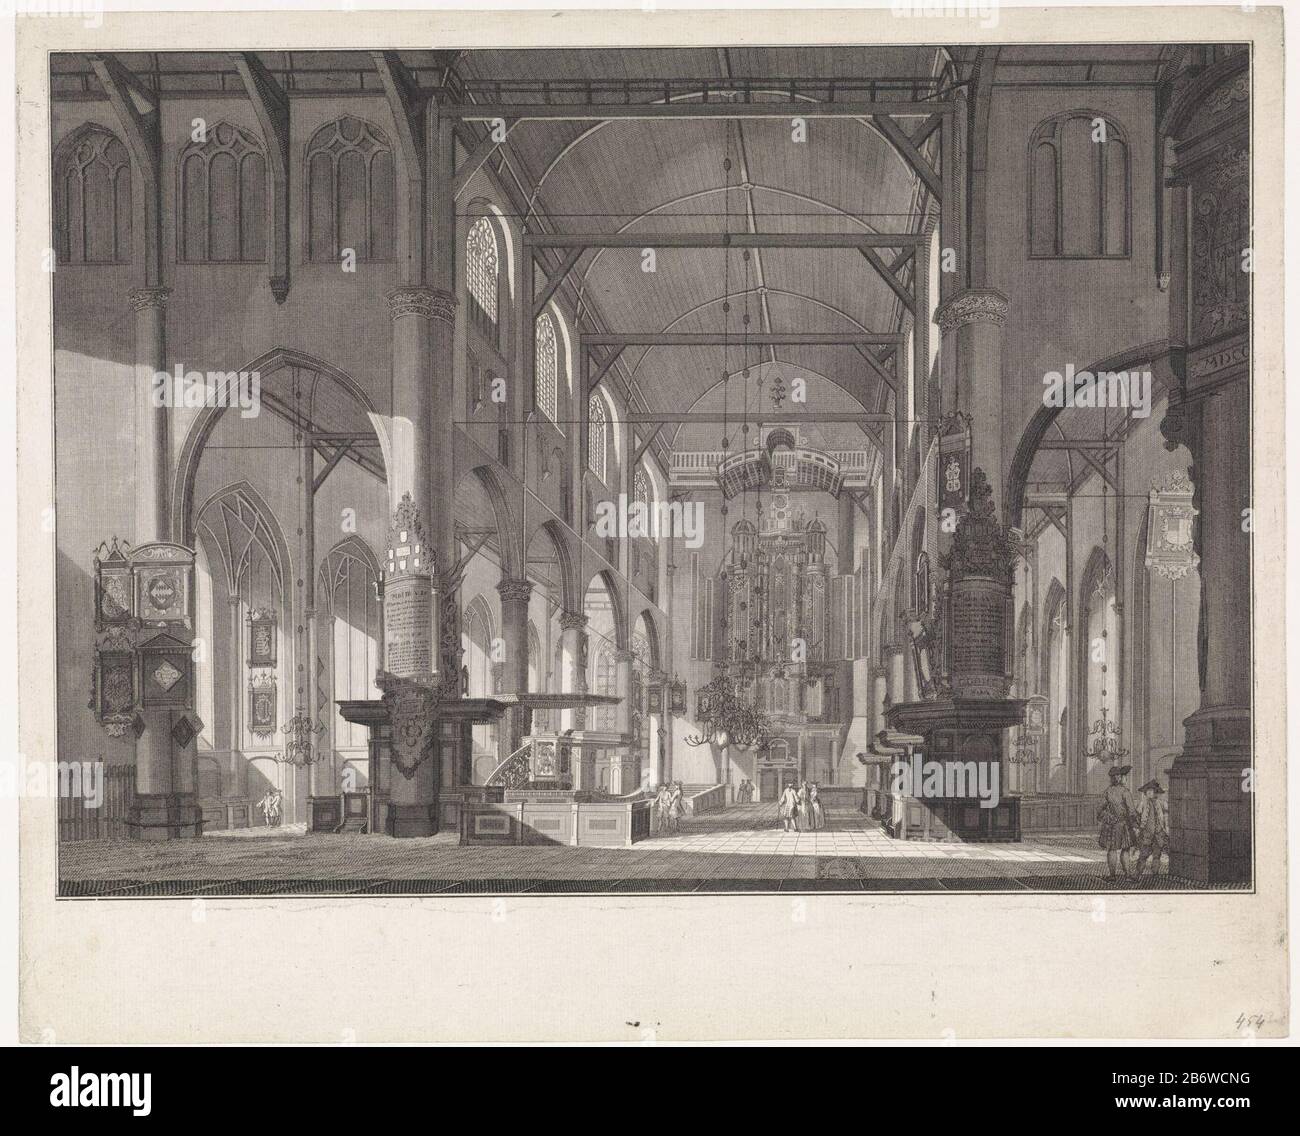 Interieur van de Grote of Sint-Laurenskerk te Rotterdam, gezien in de richting van het orgel Interior of the Great or Laurens Church in Rotterdam, seen in the direction of the organ. In the church are some figuren. Manufacturer : printmaker Jan Point to drawing: Paul LienderPlaats of manufacture: Amsterdam Date: or attributes 1758 Physical: etching and engra; proofing material: paper Technique: etching / engra (printing process) Measurements: sheet: h 371 mm × W 455 mmToelichtingZie RP-P-1907-2150, and RP-P-AO-13-32 for the second staat. Subject: interior of church church organ in which: Grote Stock Photo